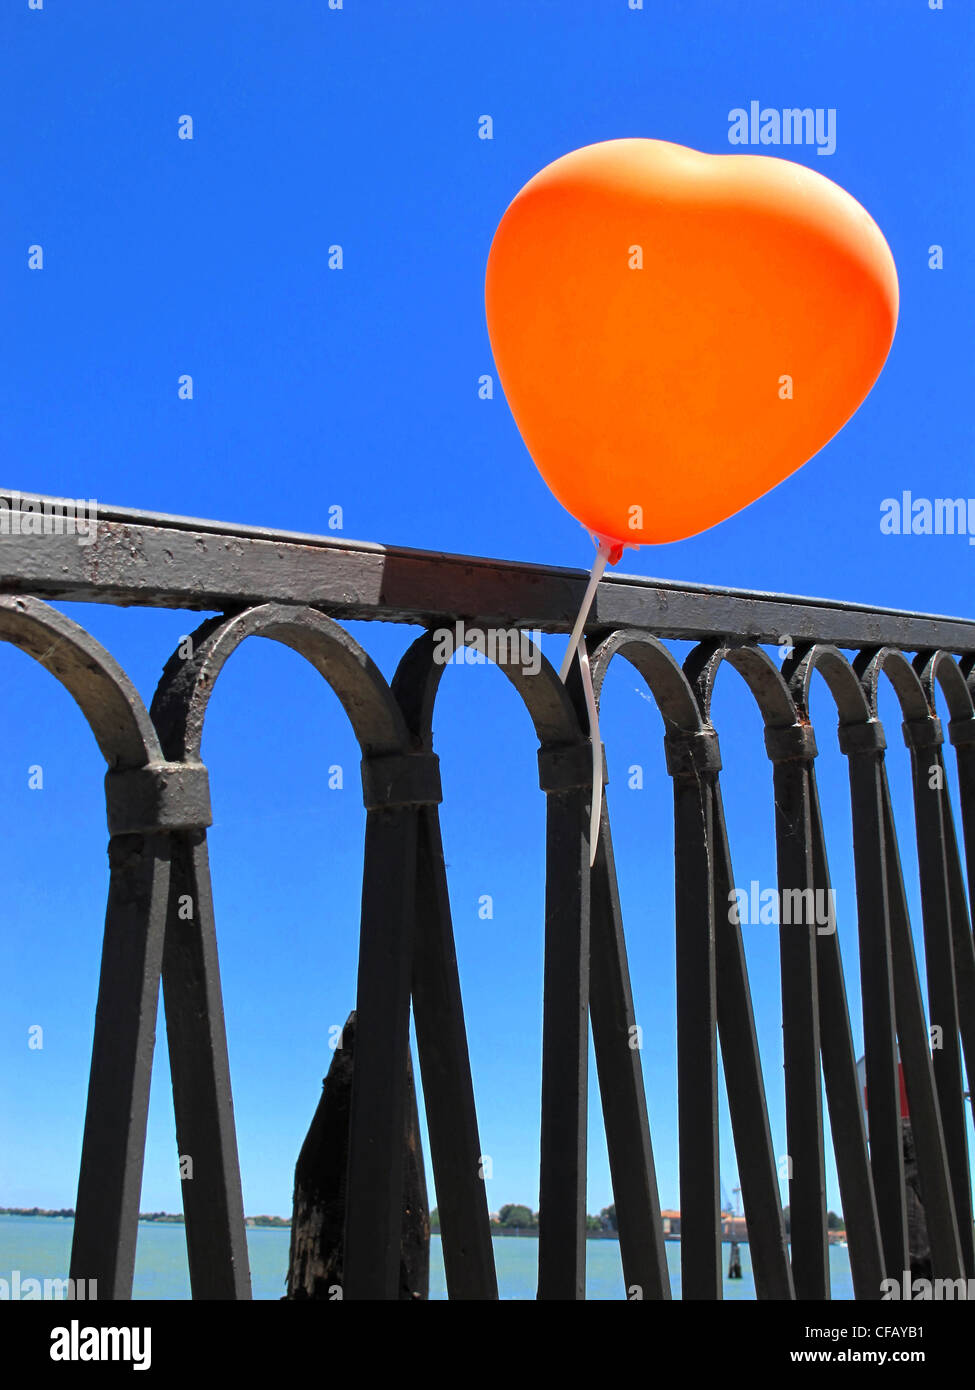 Heart, love, symbol, concepts, emotion, balloon, red, fence, railing Stock Photo